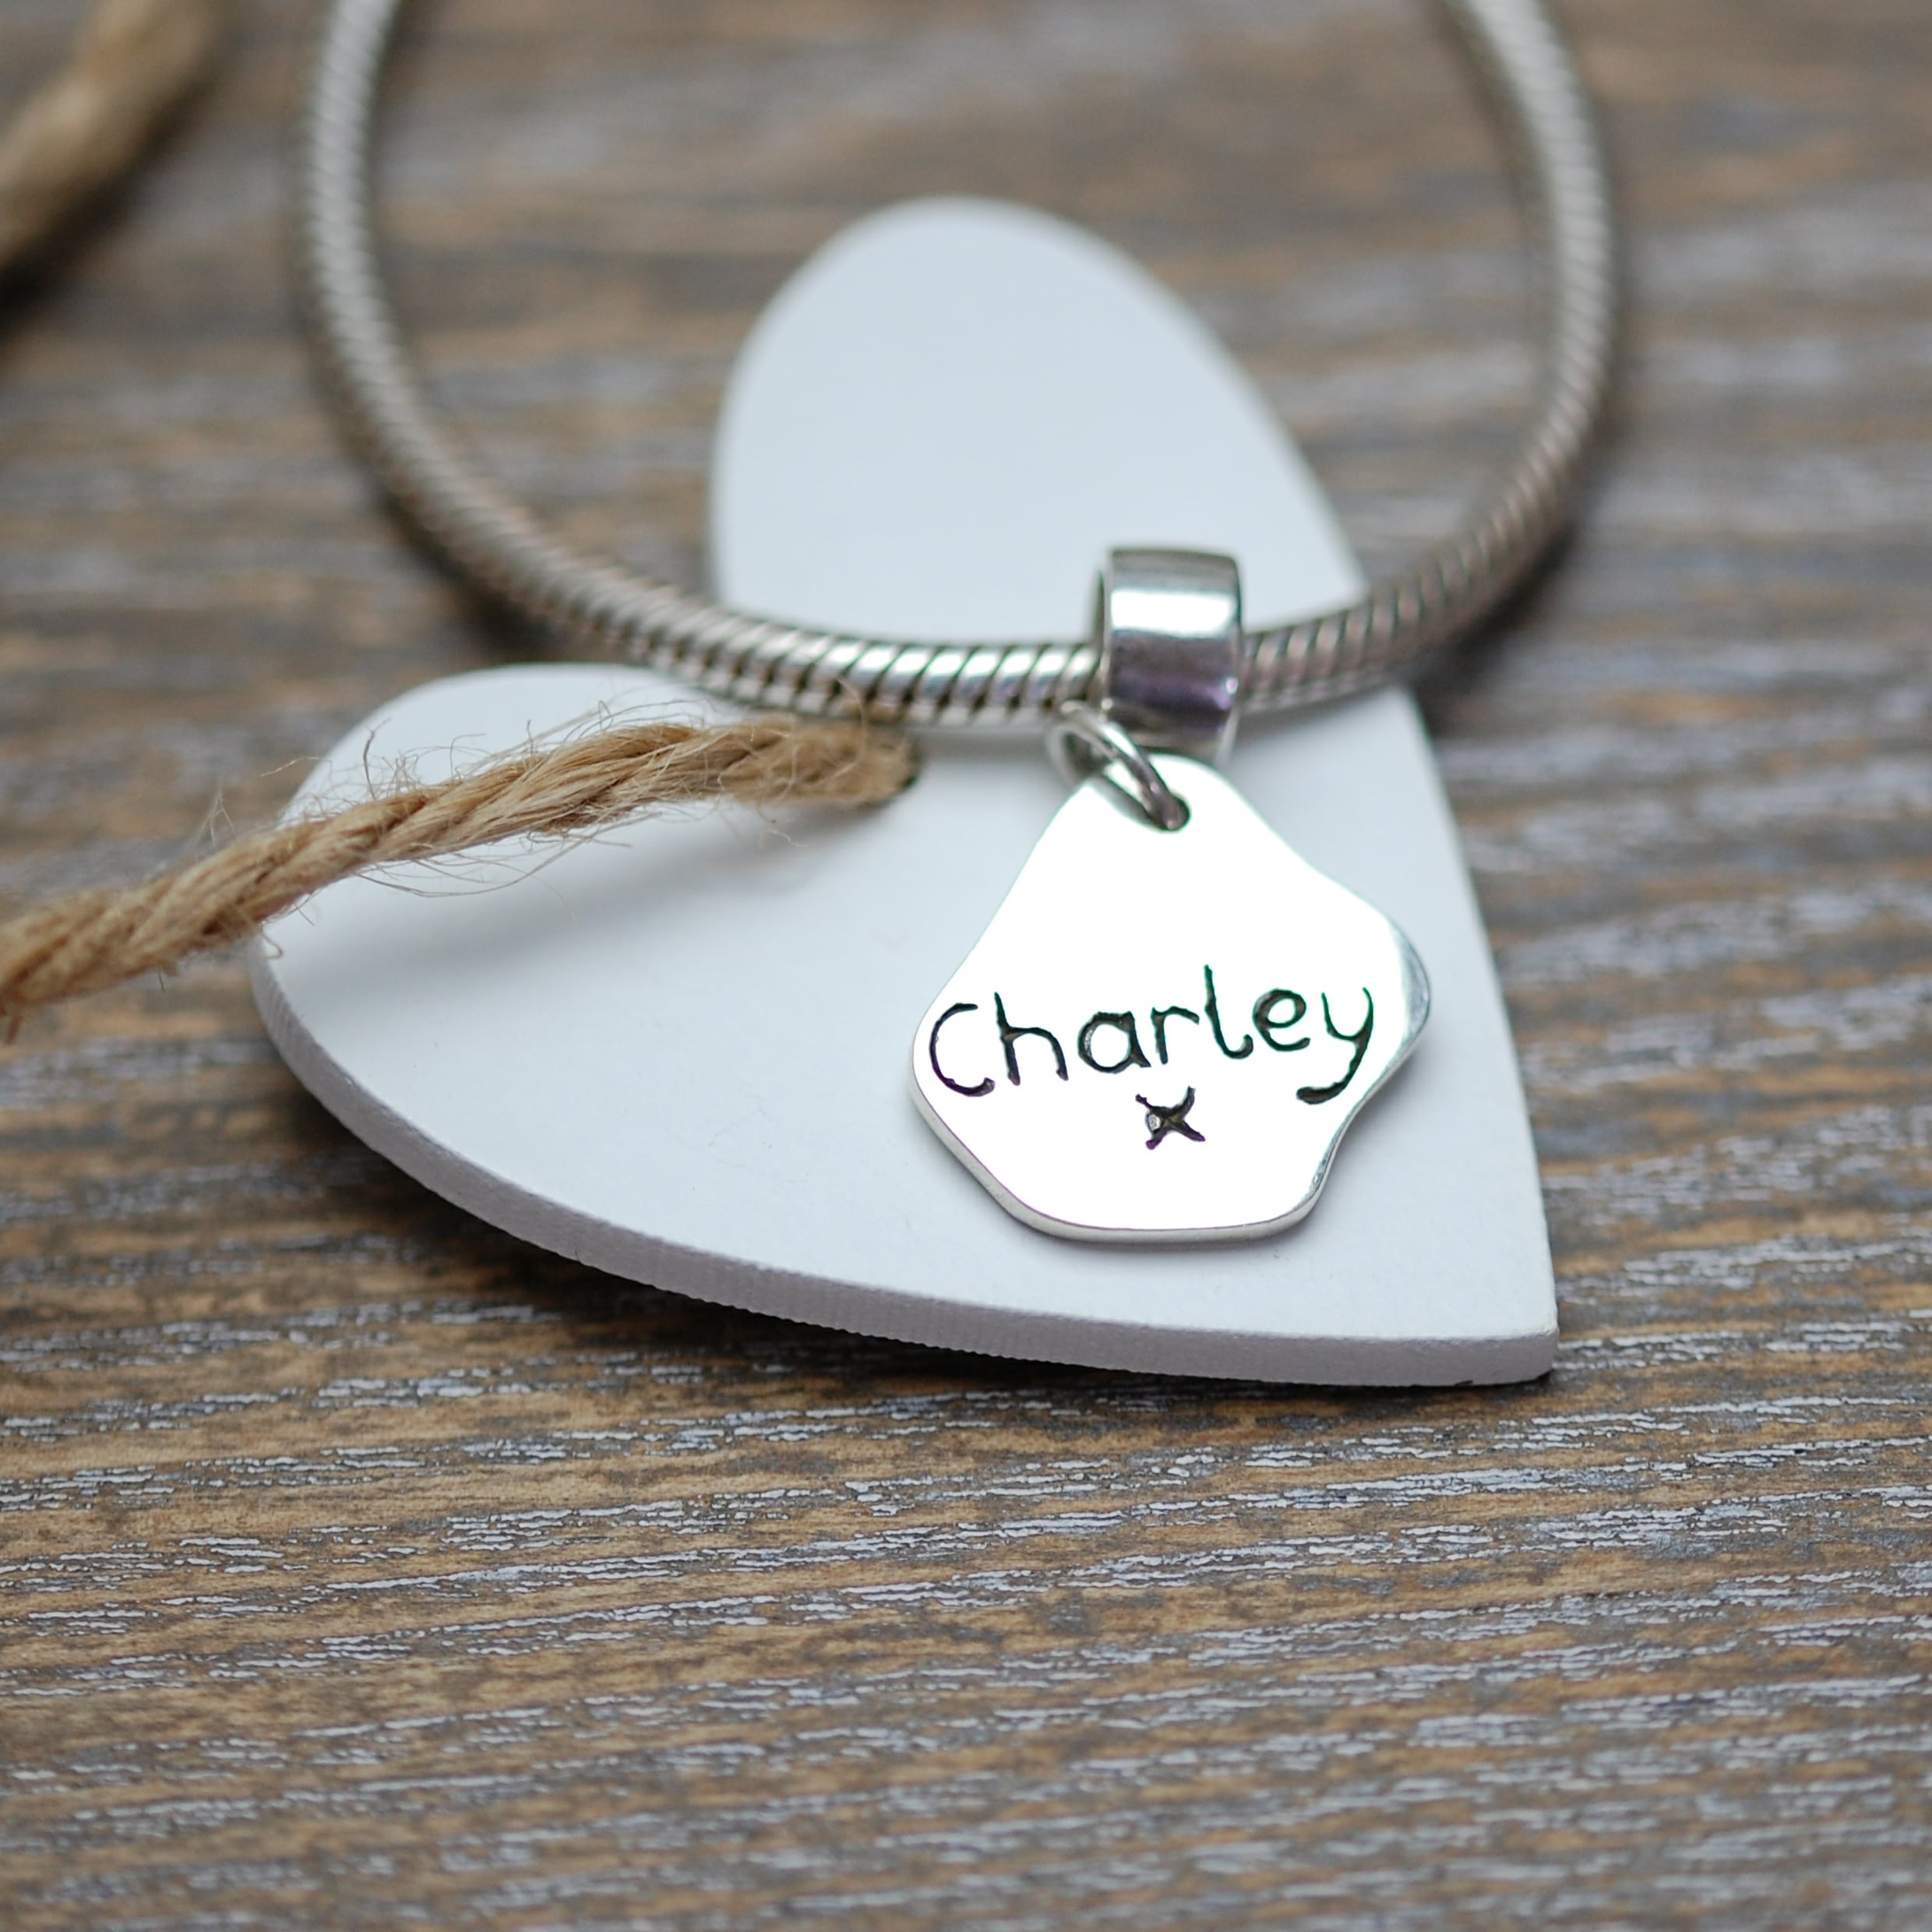 Inscription on the back of silver paw print charm